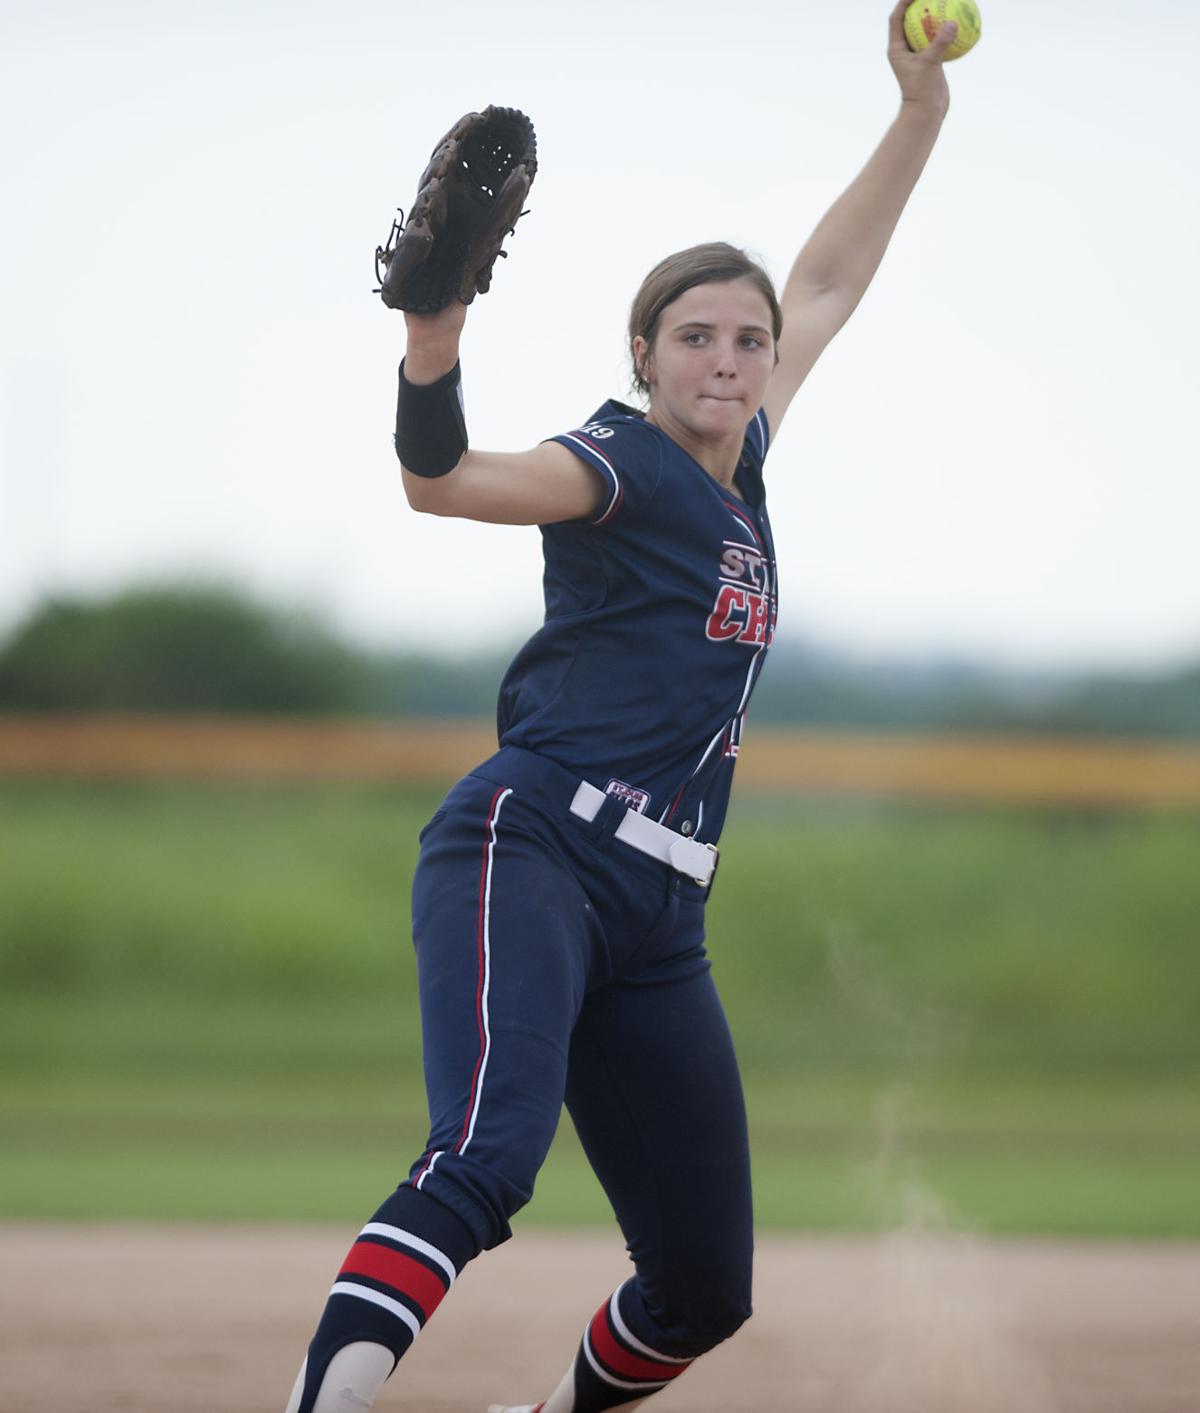 USA Softball Junior Olympic Cup 18under final St. Louis Chaos 2, Ohio